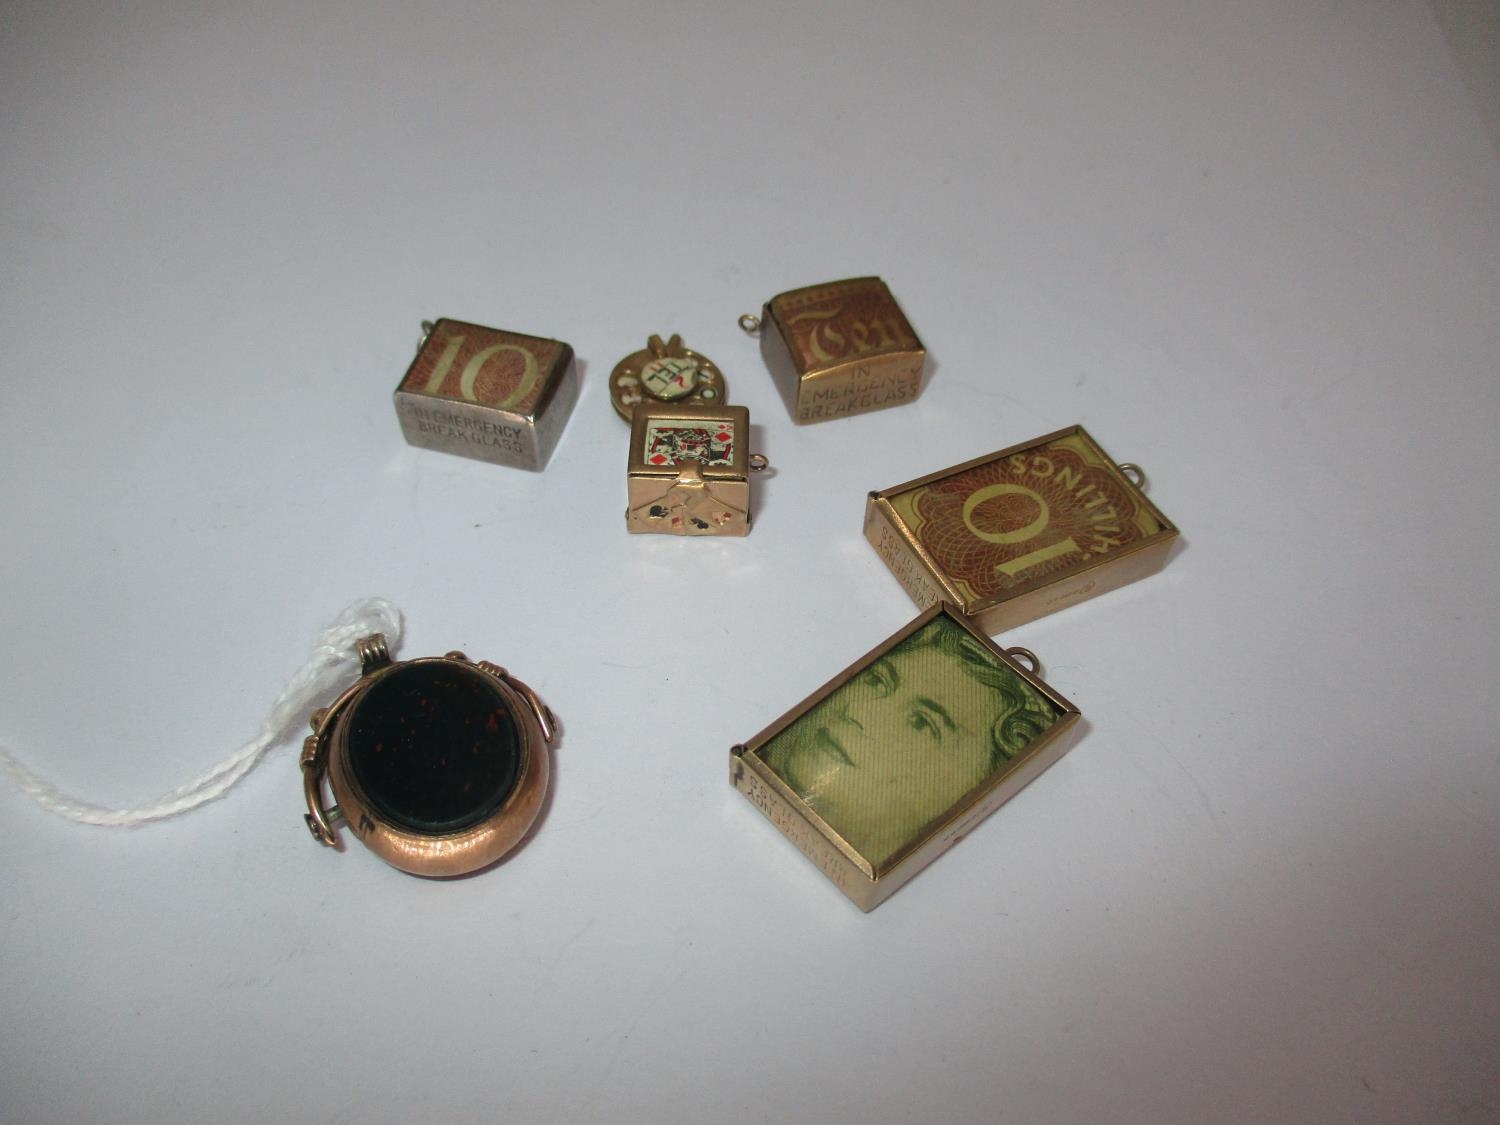 Three 9ct Gold Bank Note Pendants, 9ct Gold Telephone Dial Pendants, 2 Other Pendants and a 9ct Gold